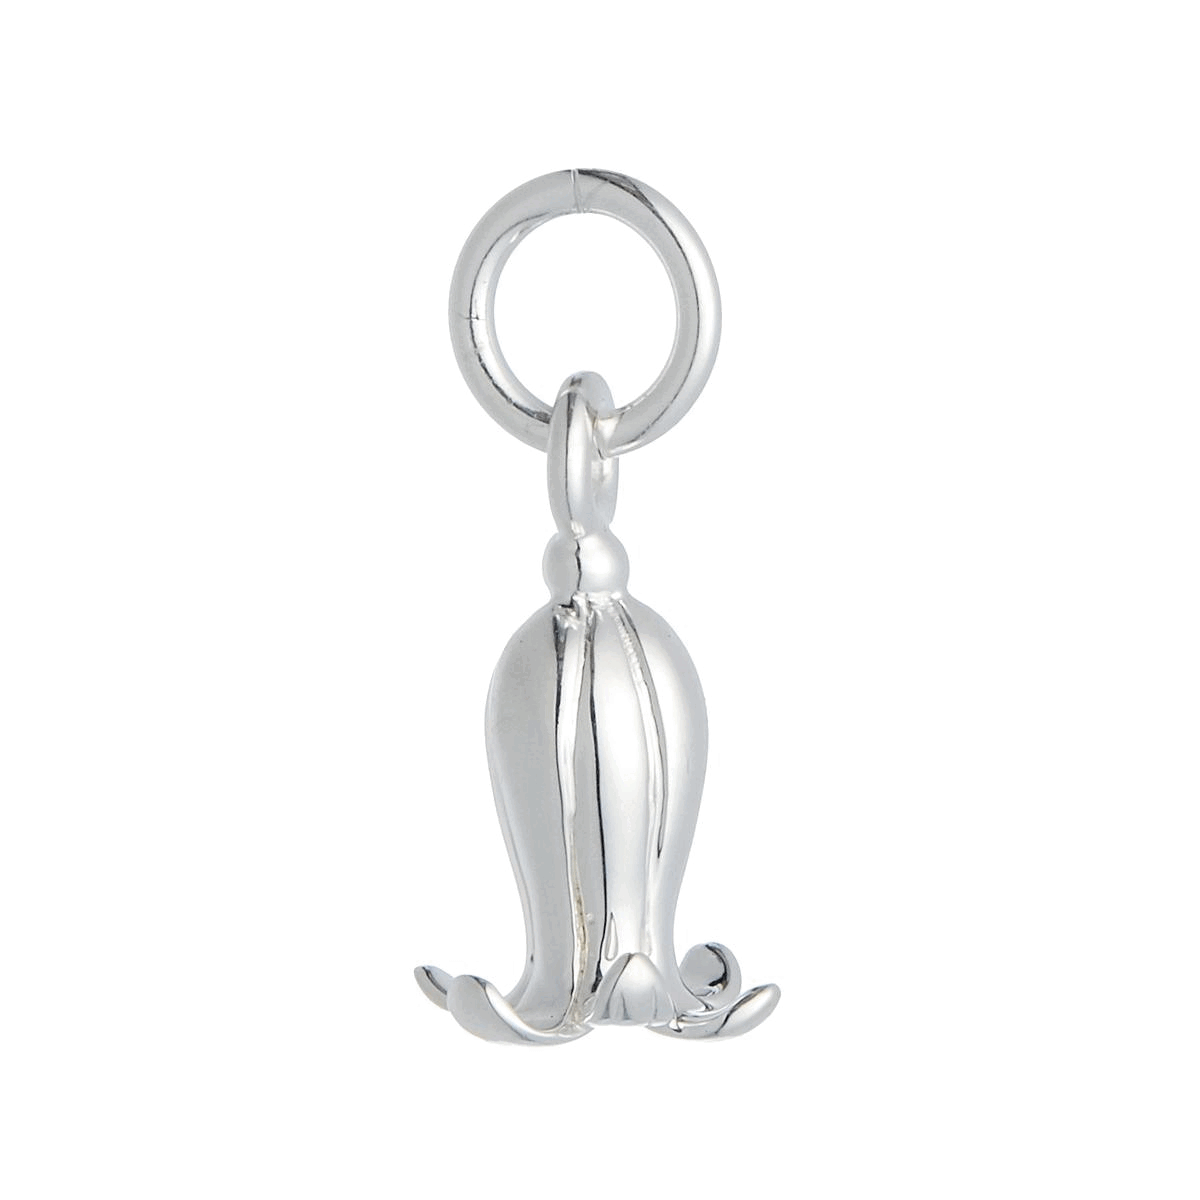 Elegant Scarlett Jewellery Bluebell Silver Charm with Open Jump Ring Detail